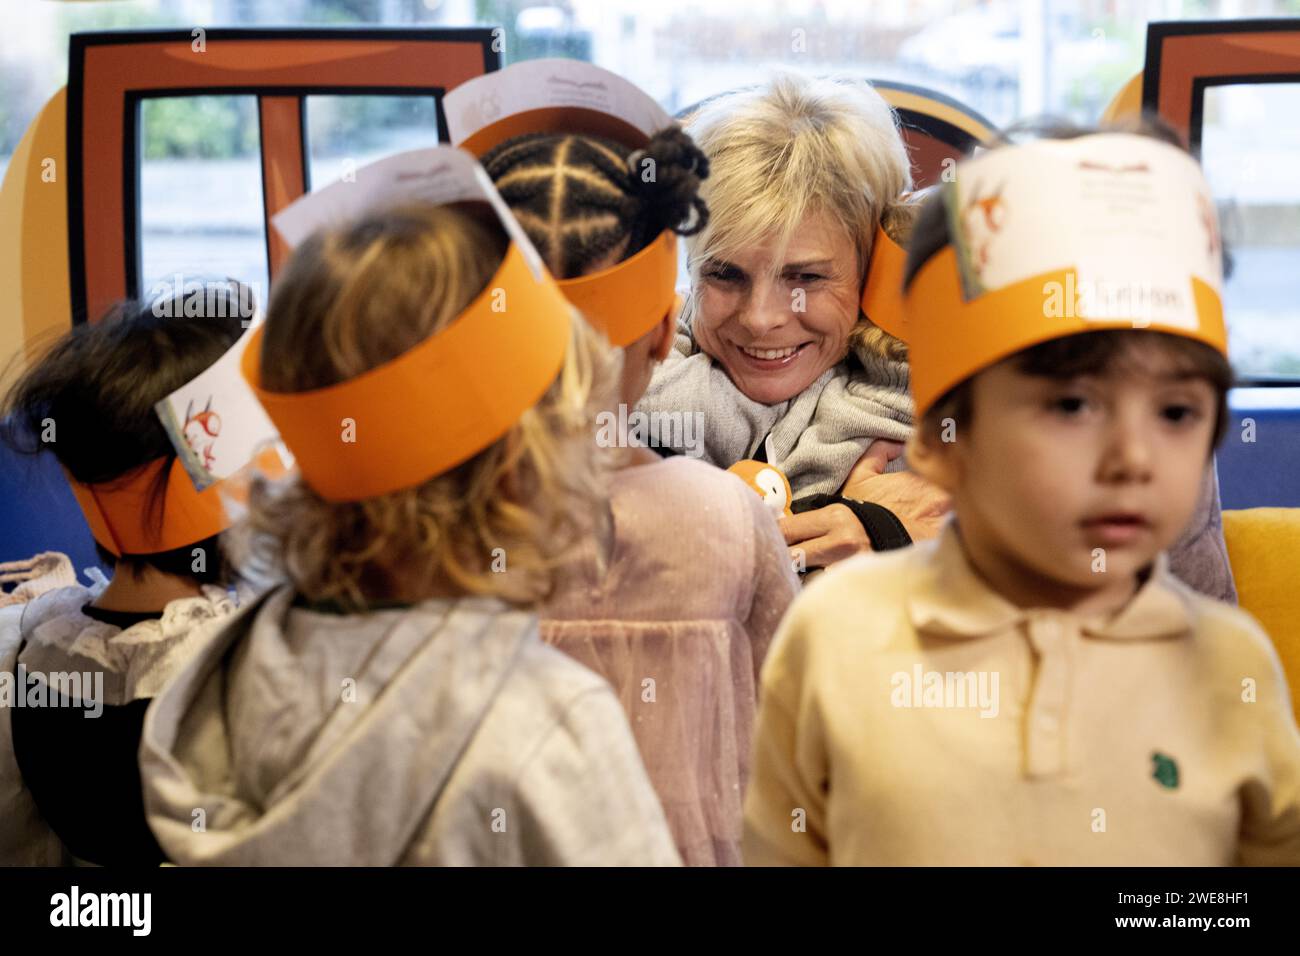 DIEMEN - Princess Laurentien reads at a daycare center during the National Reading Days. Several well-known Dutch people read during the National Reading Breakfast at a primary school, library or daycare center. ANP OLAF KRAAK netherlands out - belgium out Stock Photo